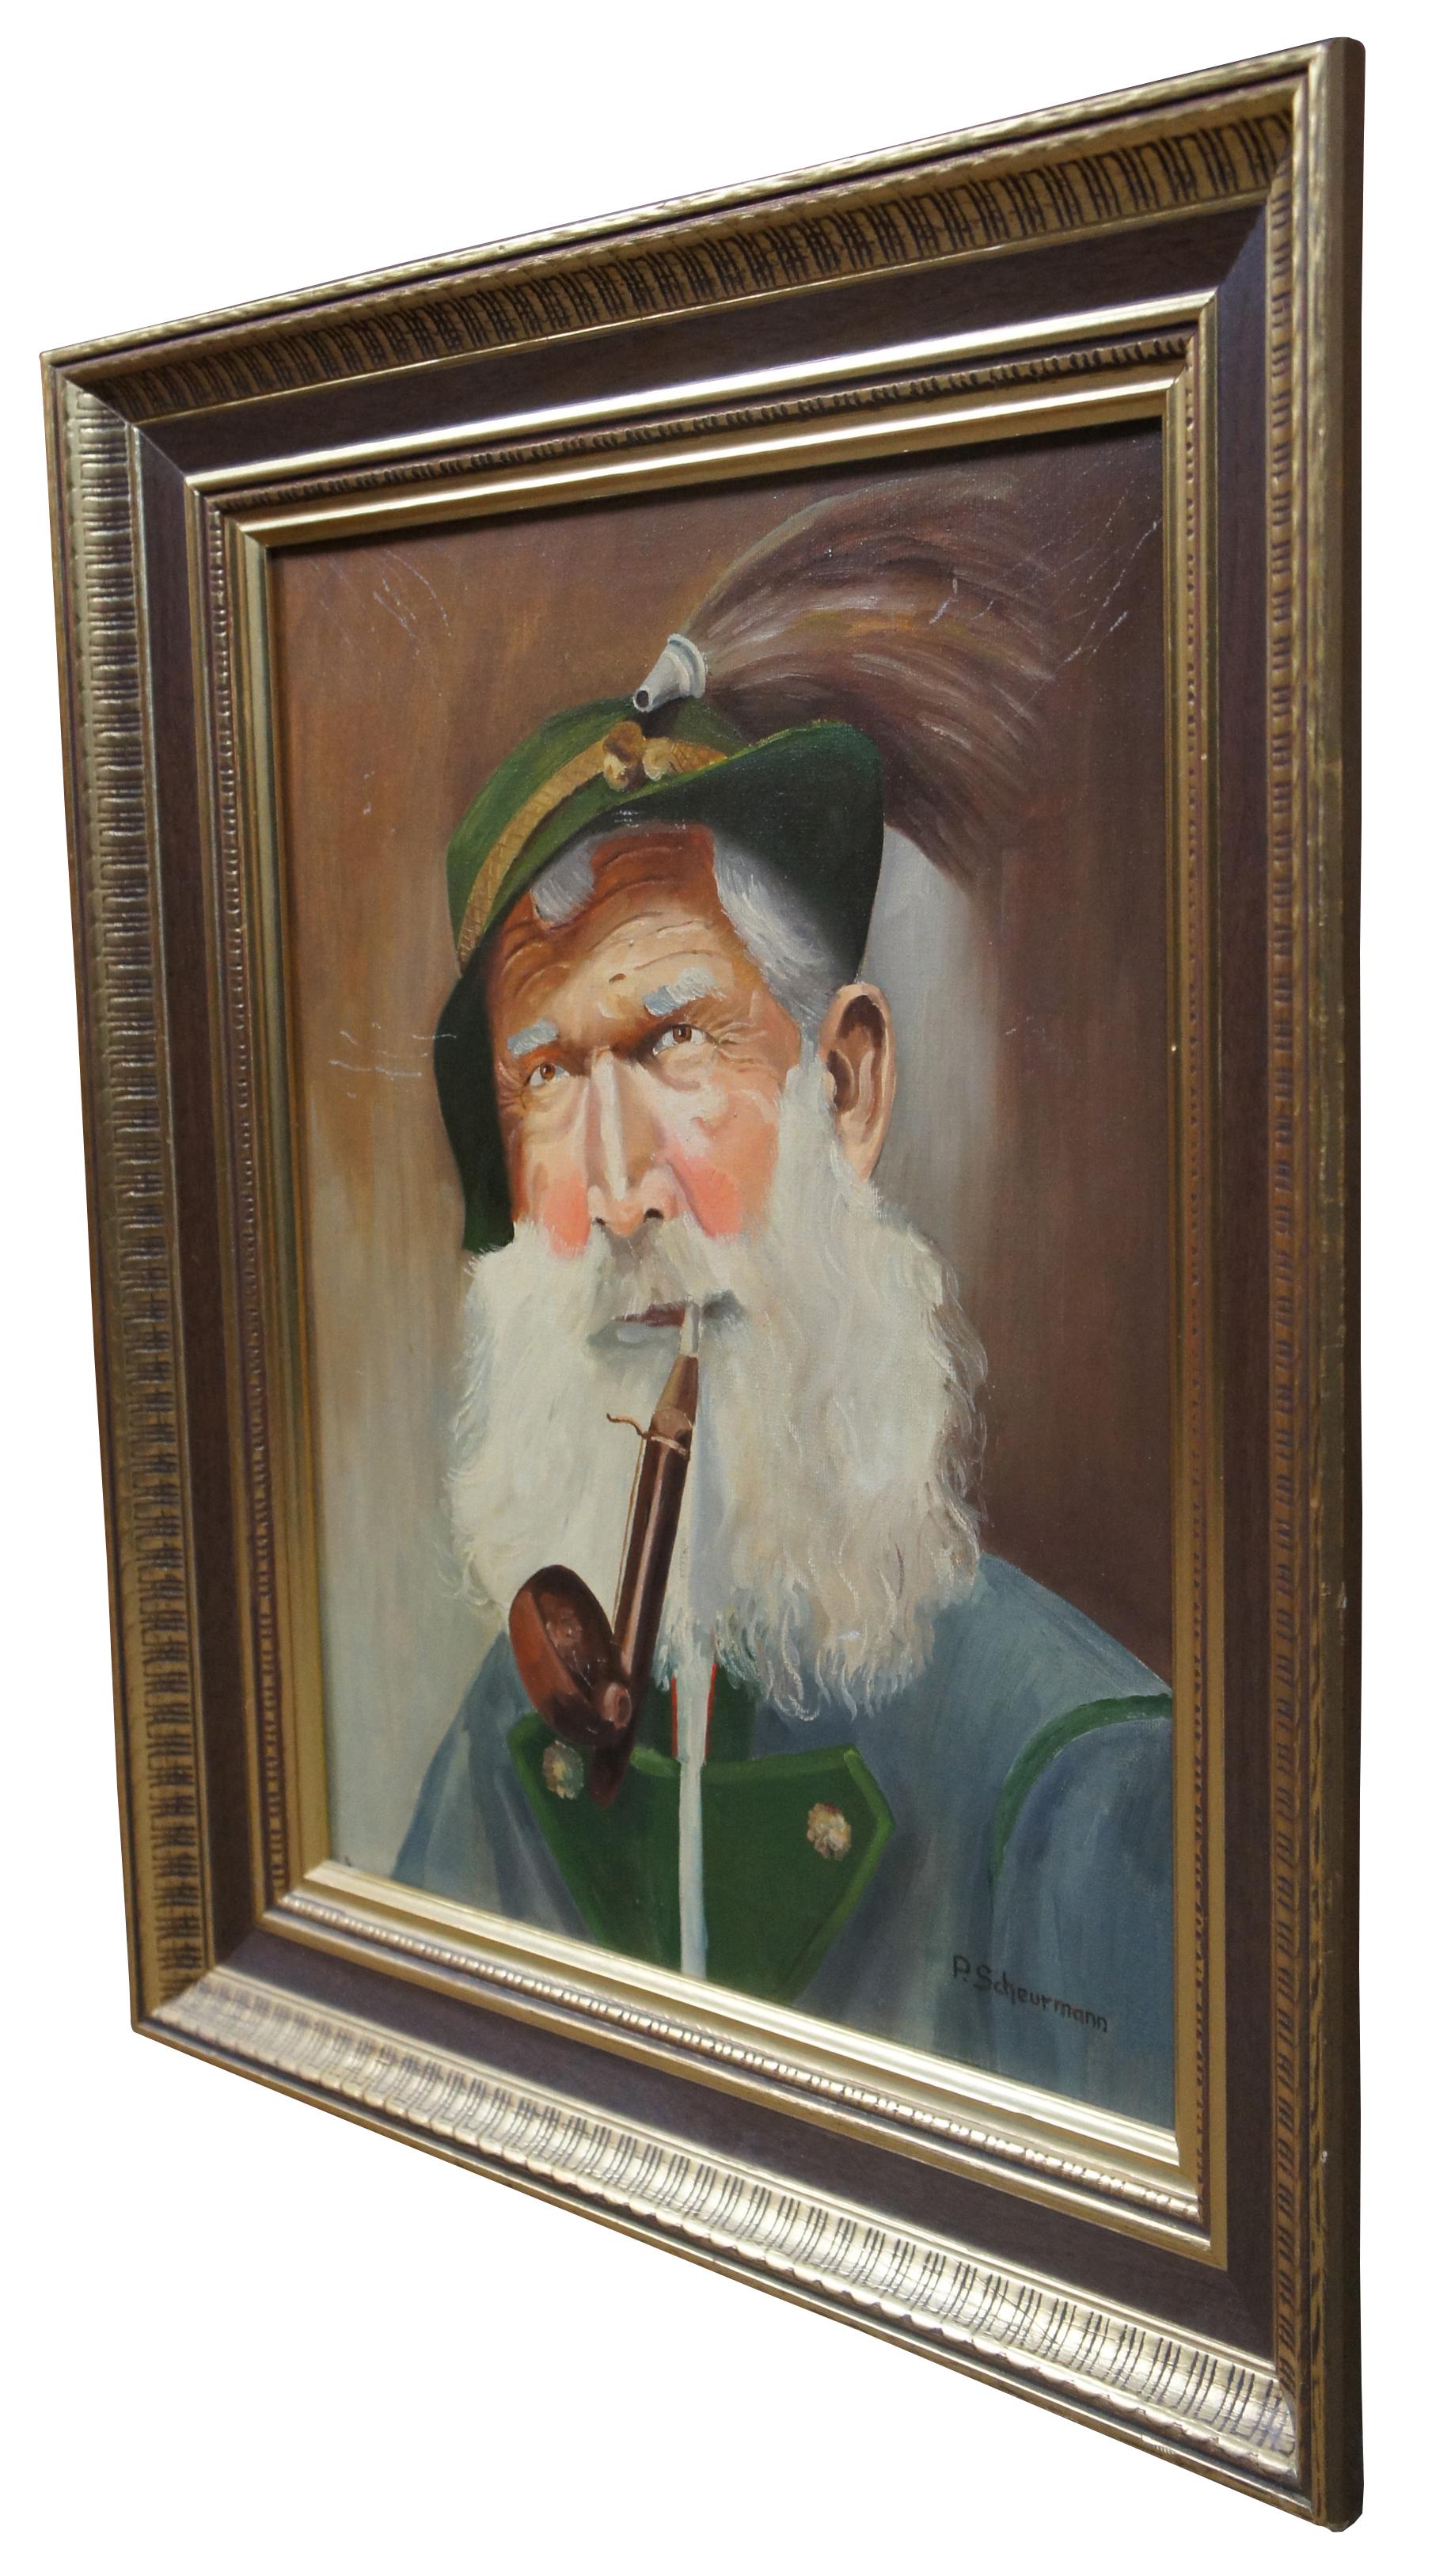 Vintage oil on canvas painting signed P. Scheurmann, showing an old German man dressed in traditional attire with a white beard and pipe wearing a green feathered hat.

Measures: 21.5” x 2.5” x 25.5” / sans frame - 15.5” x 19.5” (Width x Depth x